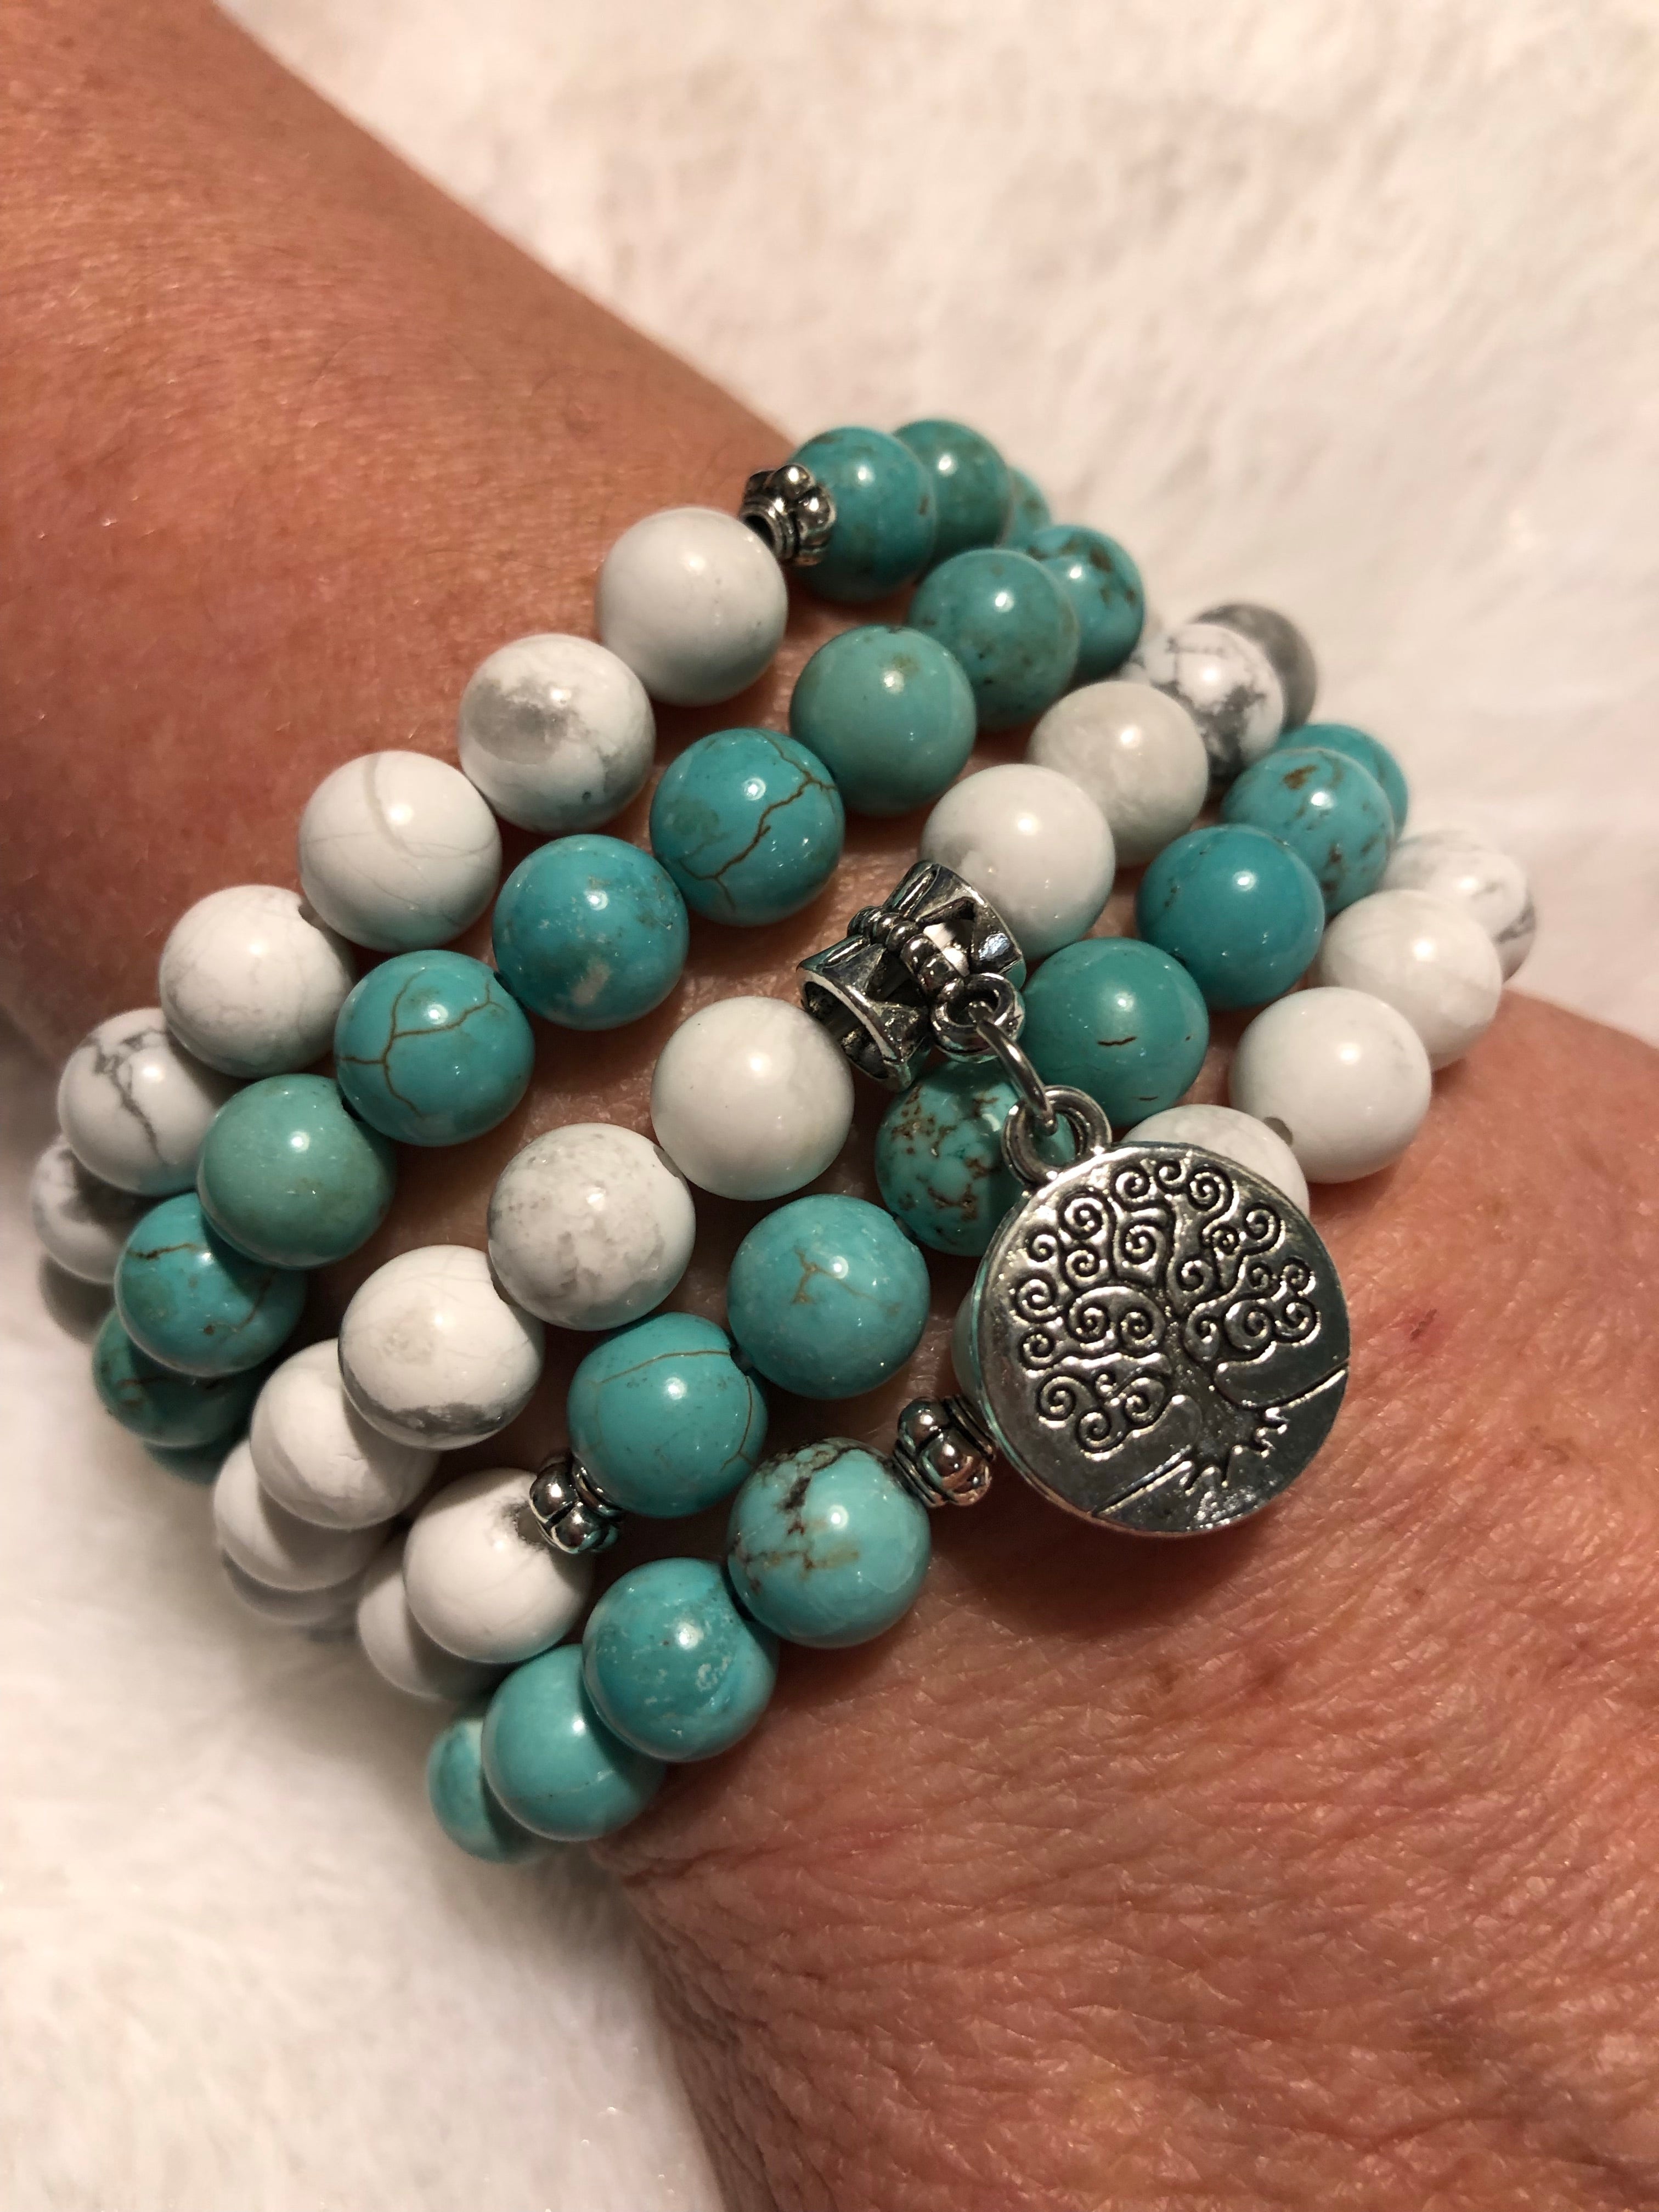 Tree of life - Howlite and Turquoise Bracelet/Necklace